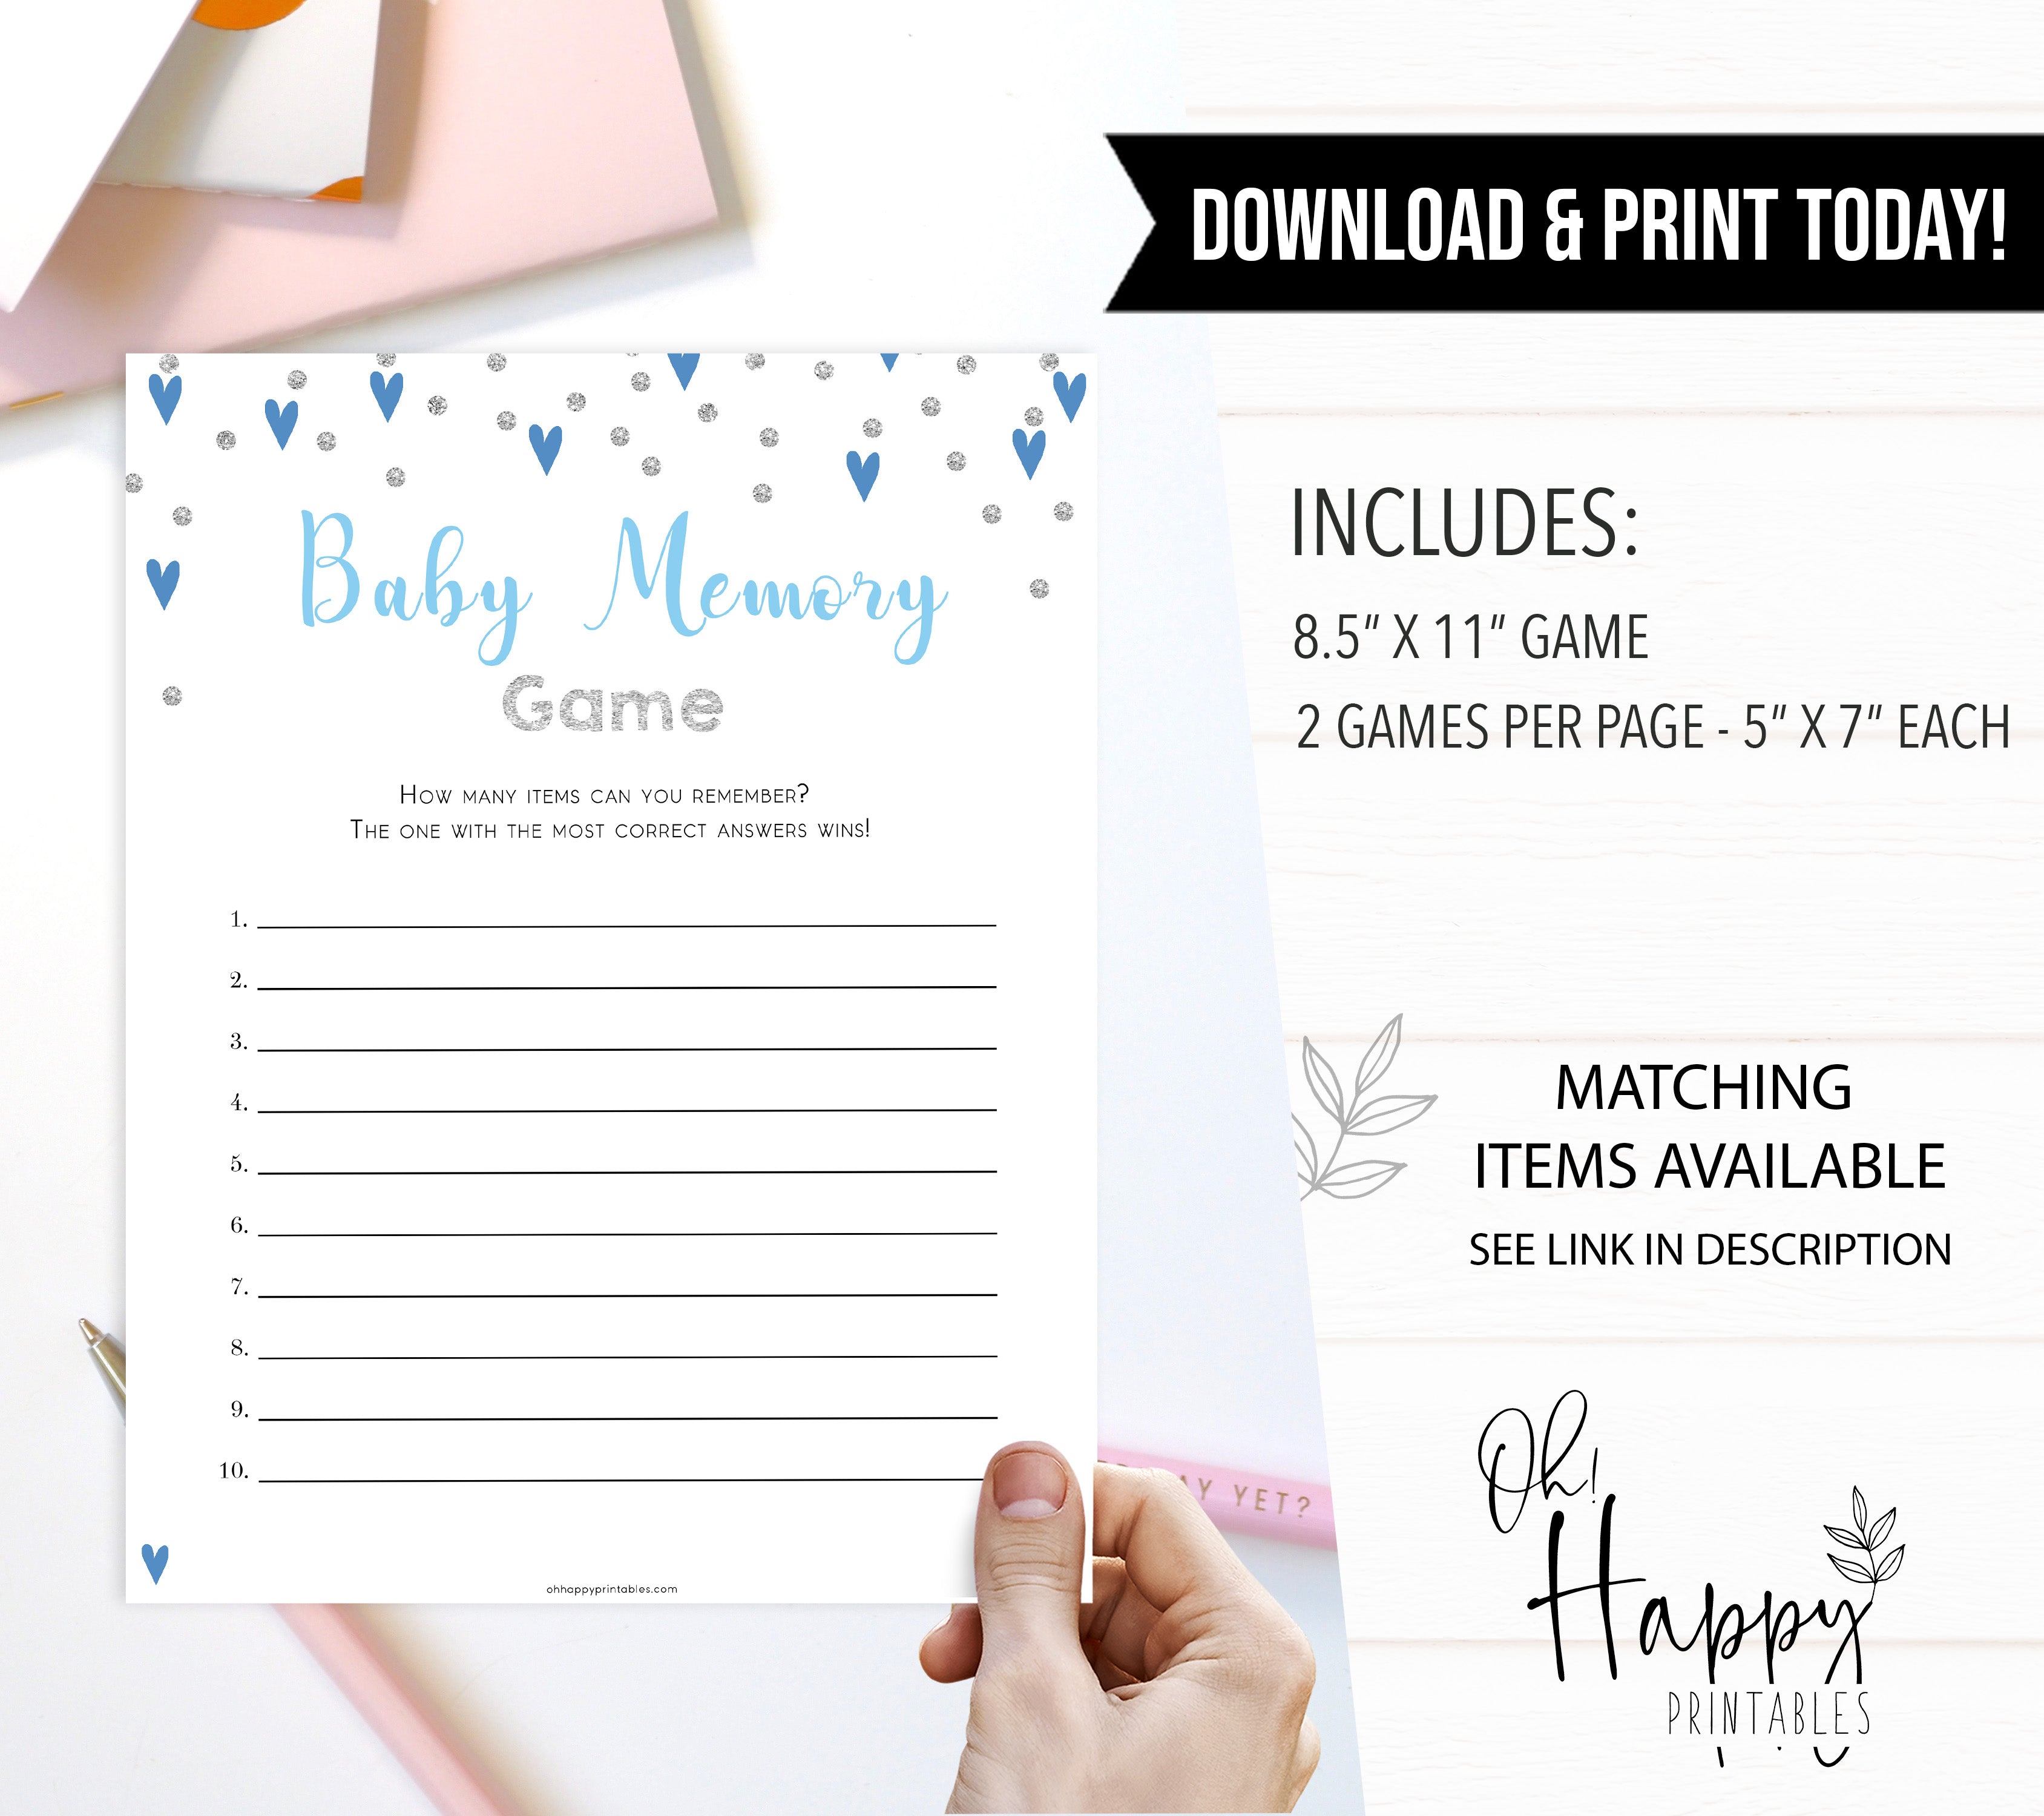 baby memory game, Printable baby shower games, small blue hearts fun baby games, baby shower games, fun baby shower ideas, top baby shower ideas, silver baby shower, blue hearts baby shower ideas